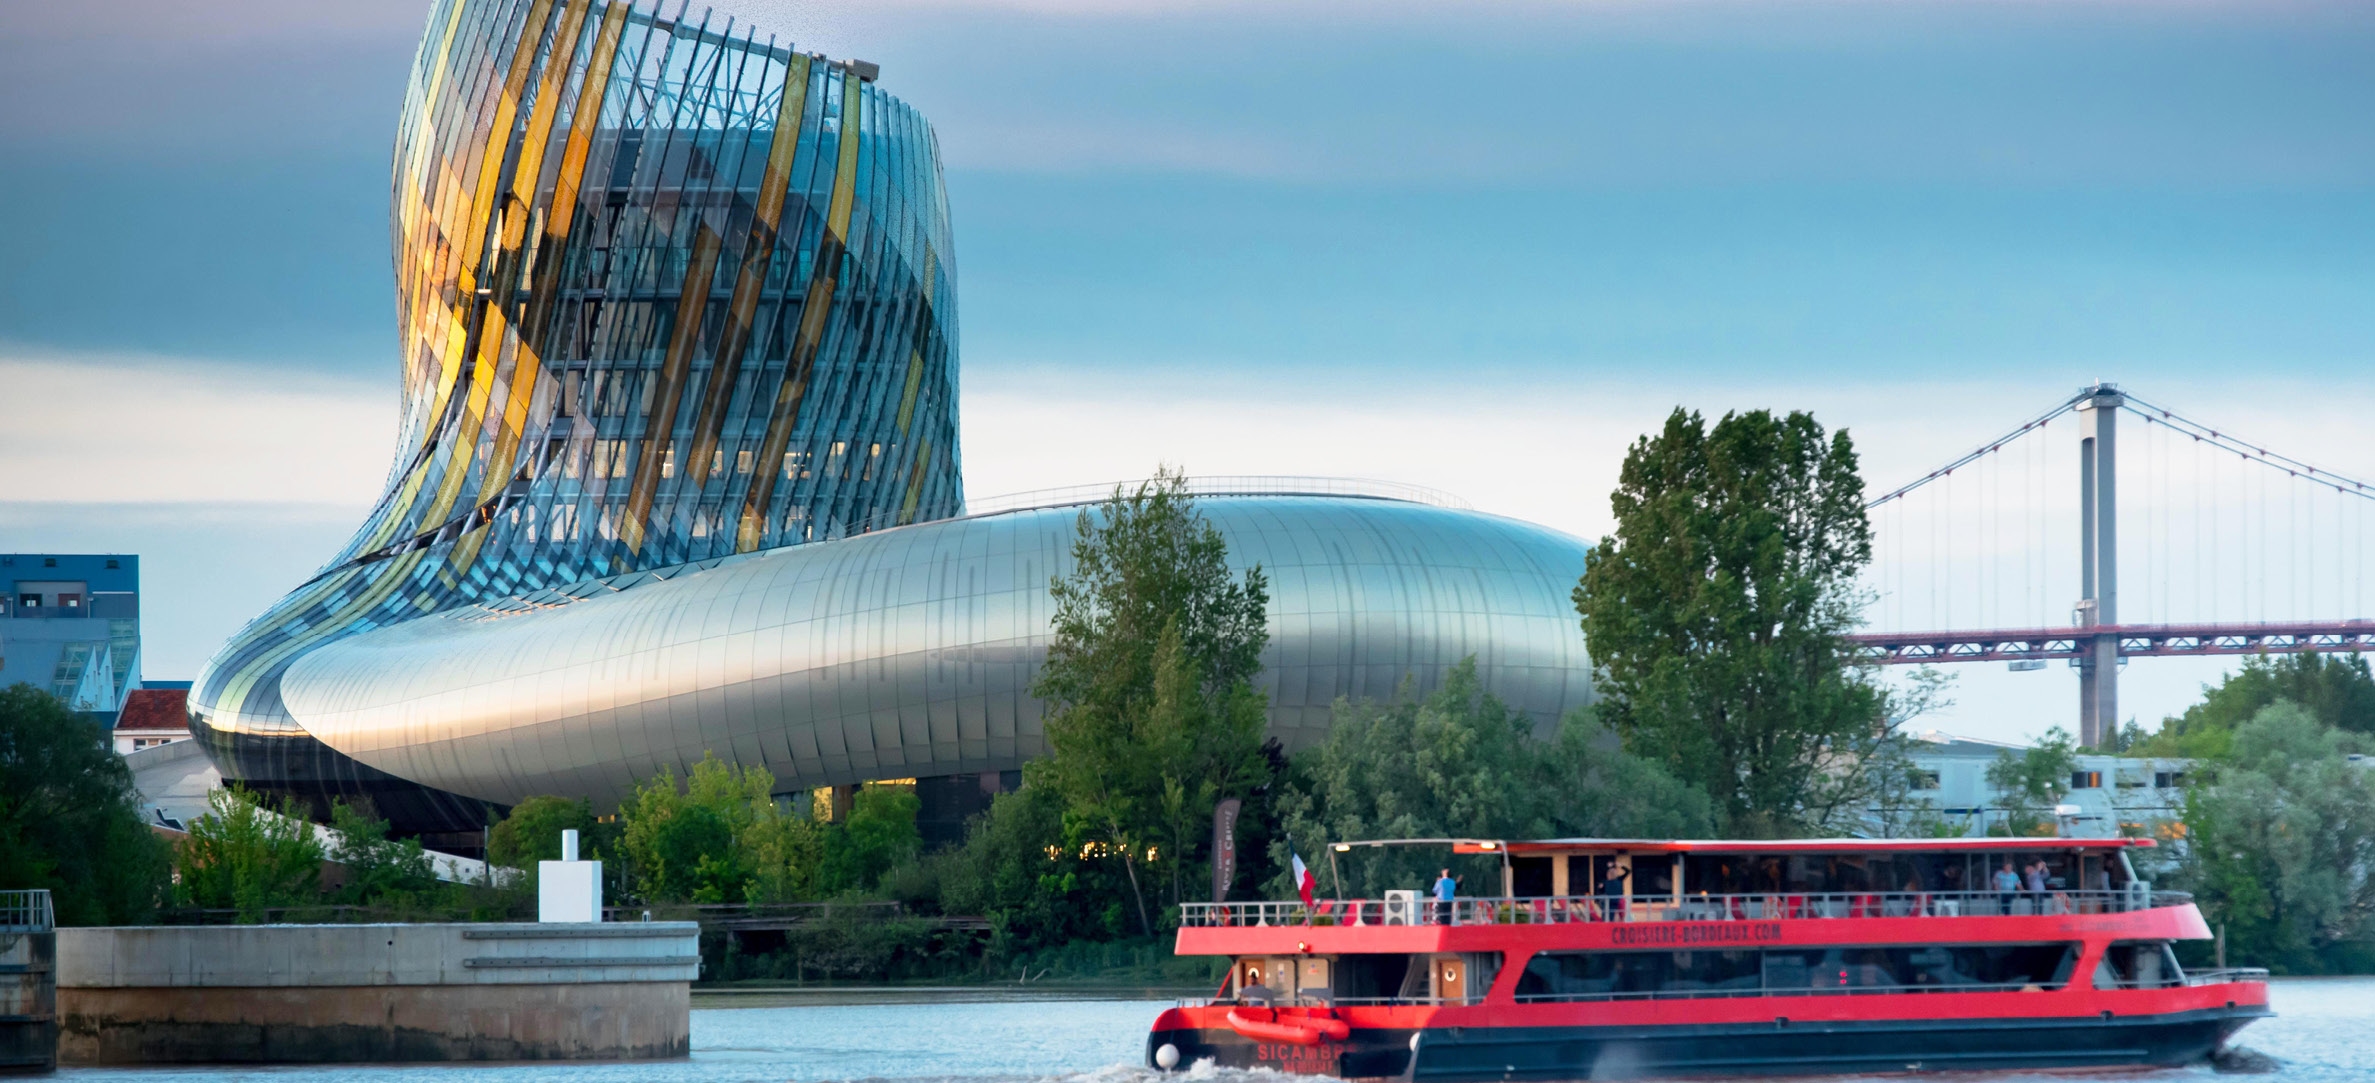 A Guide to the Cite du Vin Wine Museum in Bordeaux